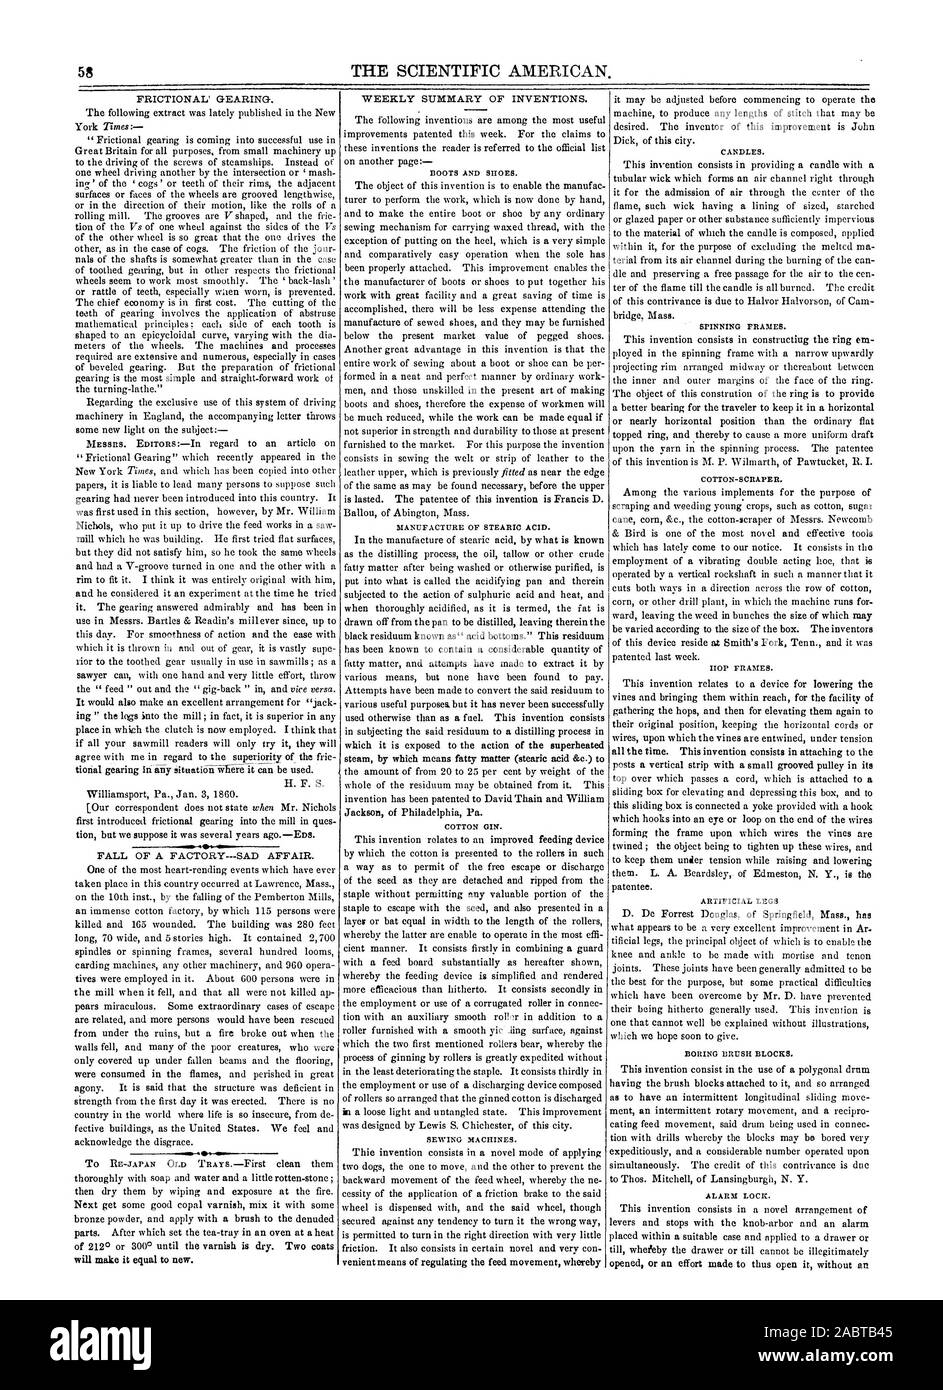 58 THE SCIENTIFIC AMERICAN. MANUFACTURE OF STEARIC ACID. COTTON GIN. SEWING MACHINES. CANDLES. SPINNING FRAMES. COTTON-SCRAPER. HOP FRAMES. ARTIFICIAL LEGS BORING BRUSH BLOCKS. ALARM LOCK., 1860-01-21 Stock Photo